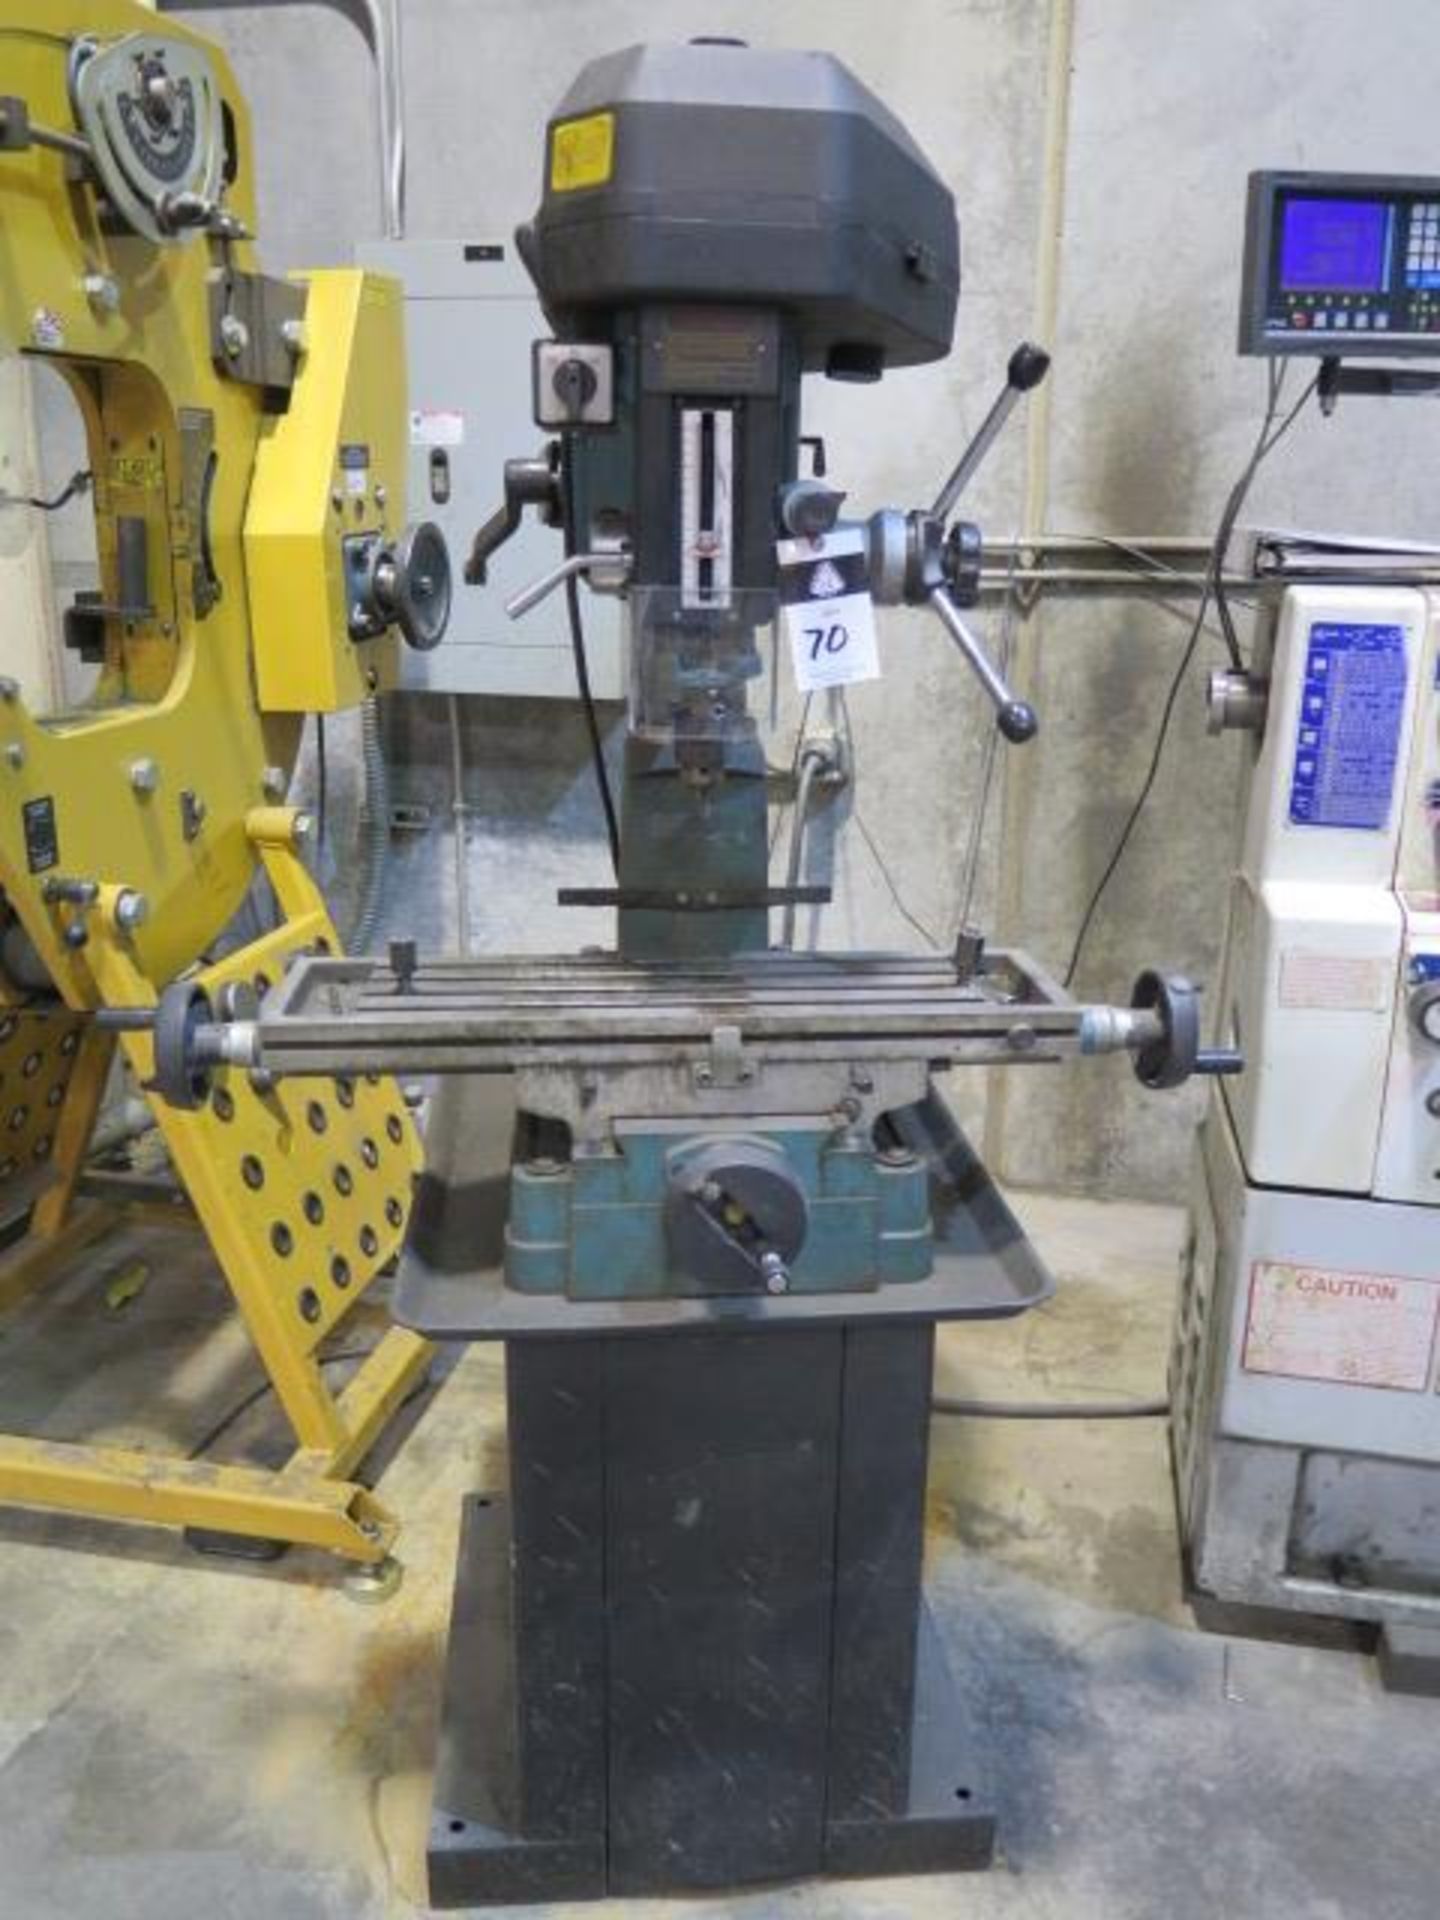 Jet Milling and Drilling Machine w/ 8 ¼”x 28 ½” Table (SOLD AS-IS - NO WARRANTY)